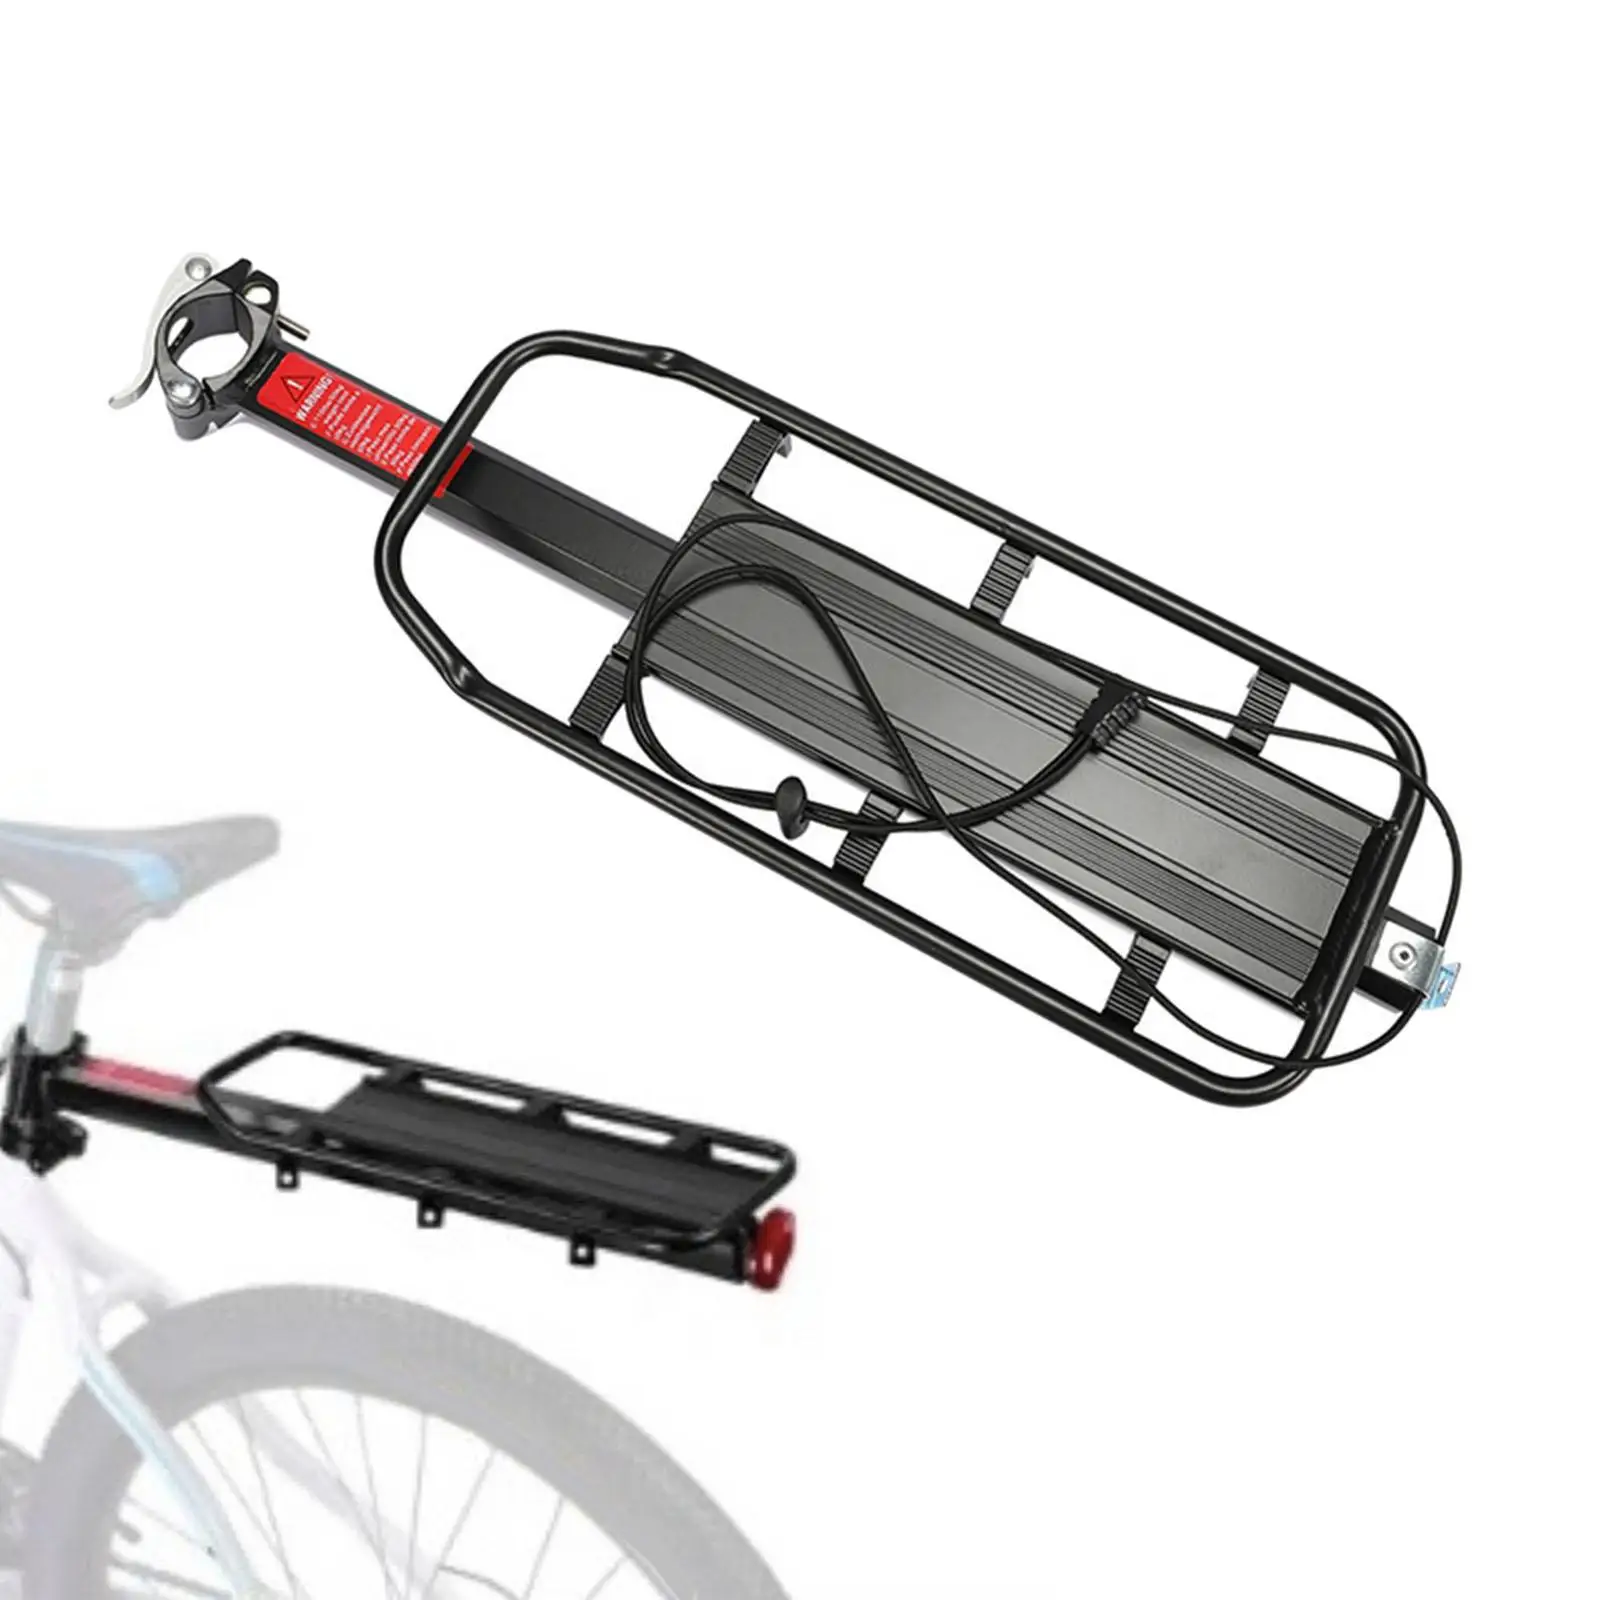 Bike Cargo Rack Bicycle Rack Quick Release for Back of Bike for Secure Cargo